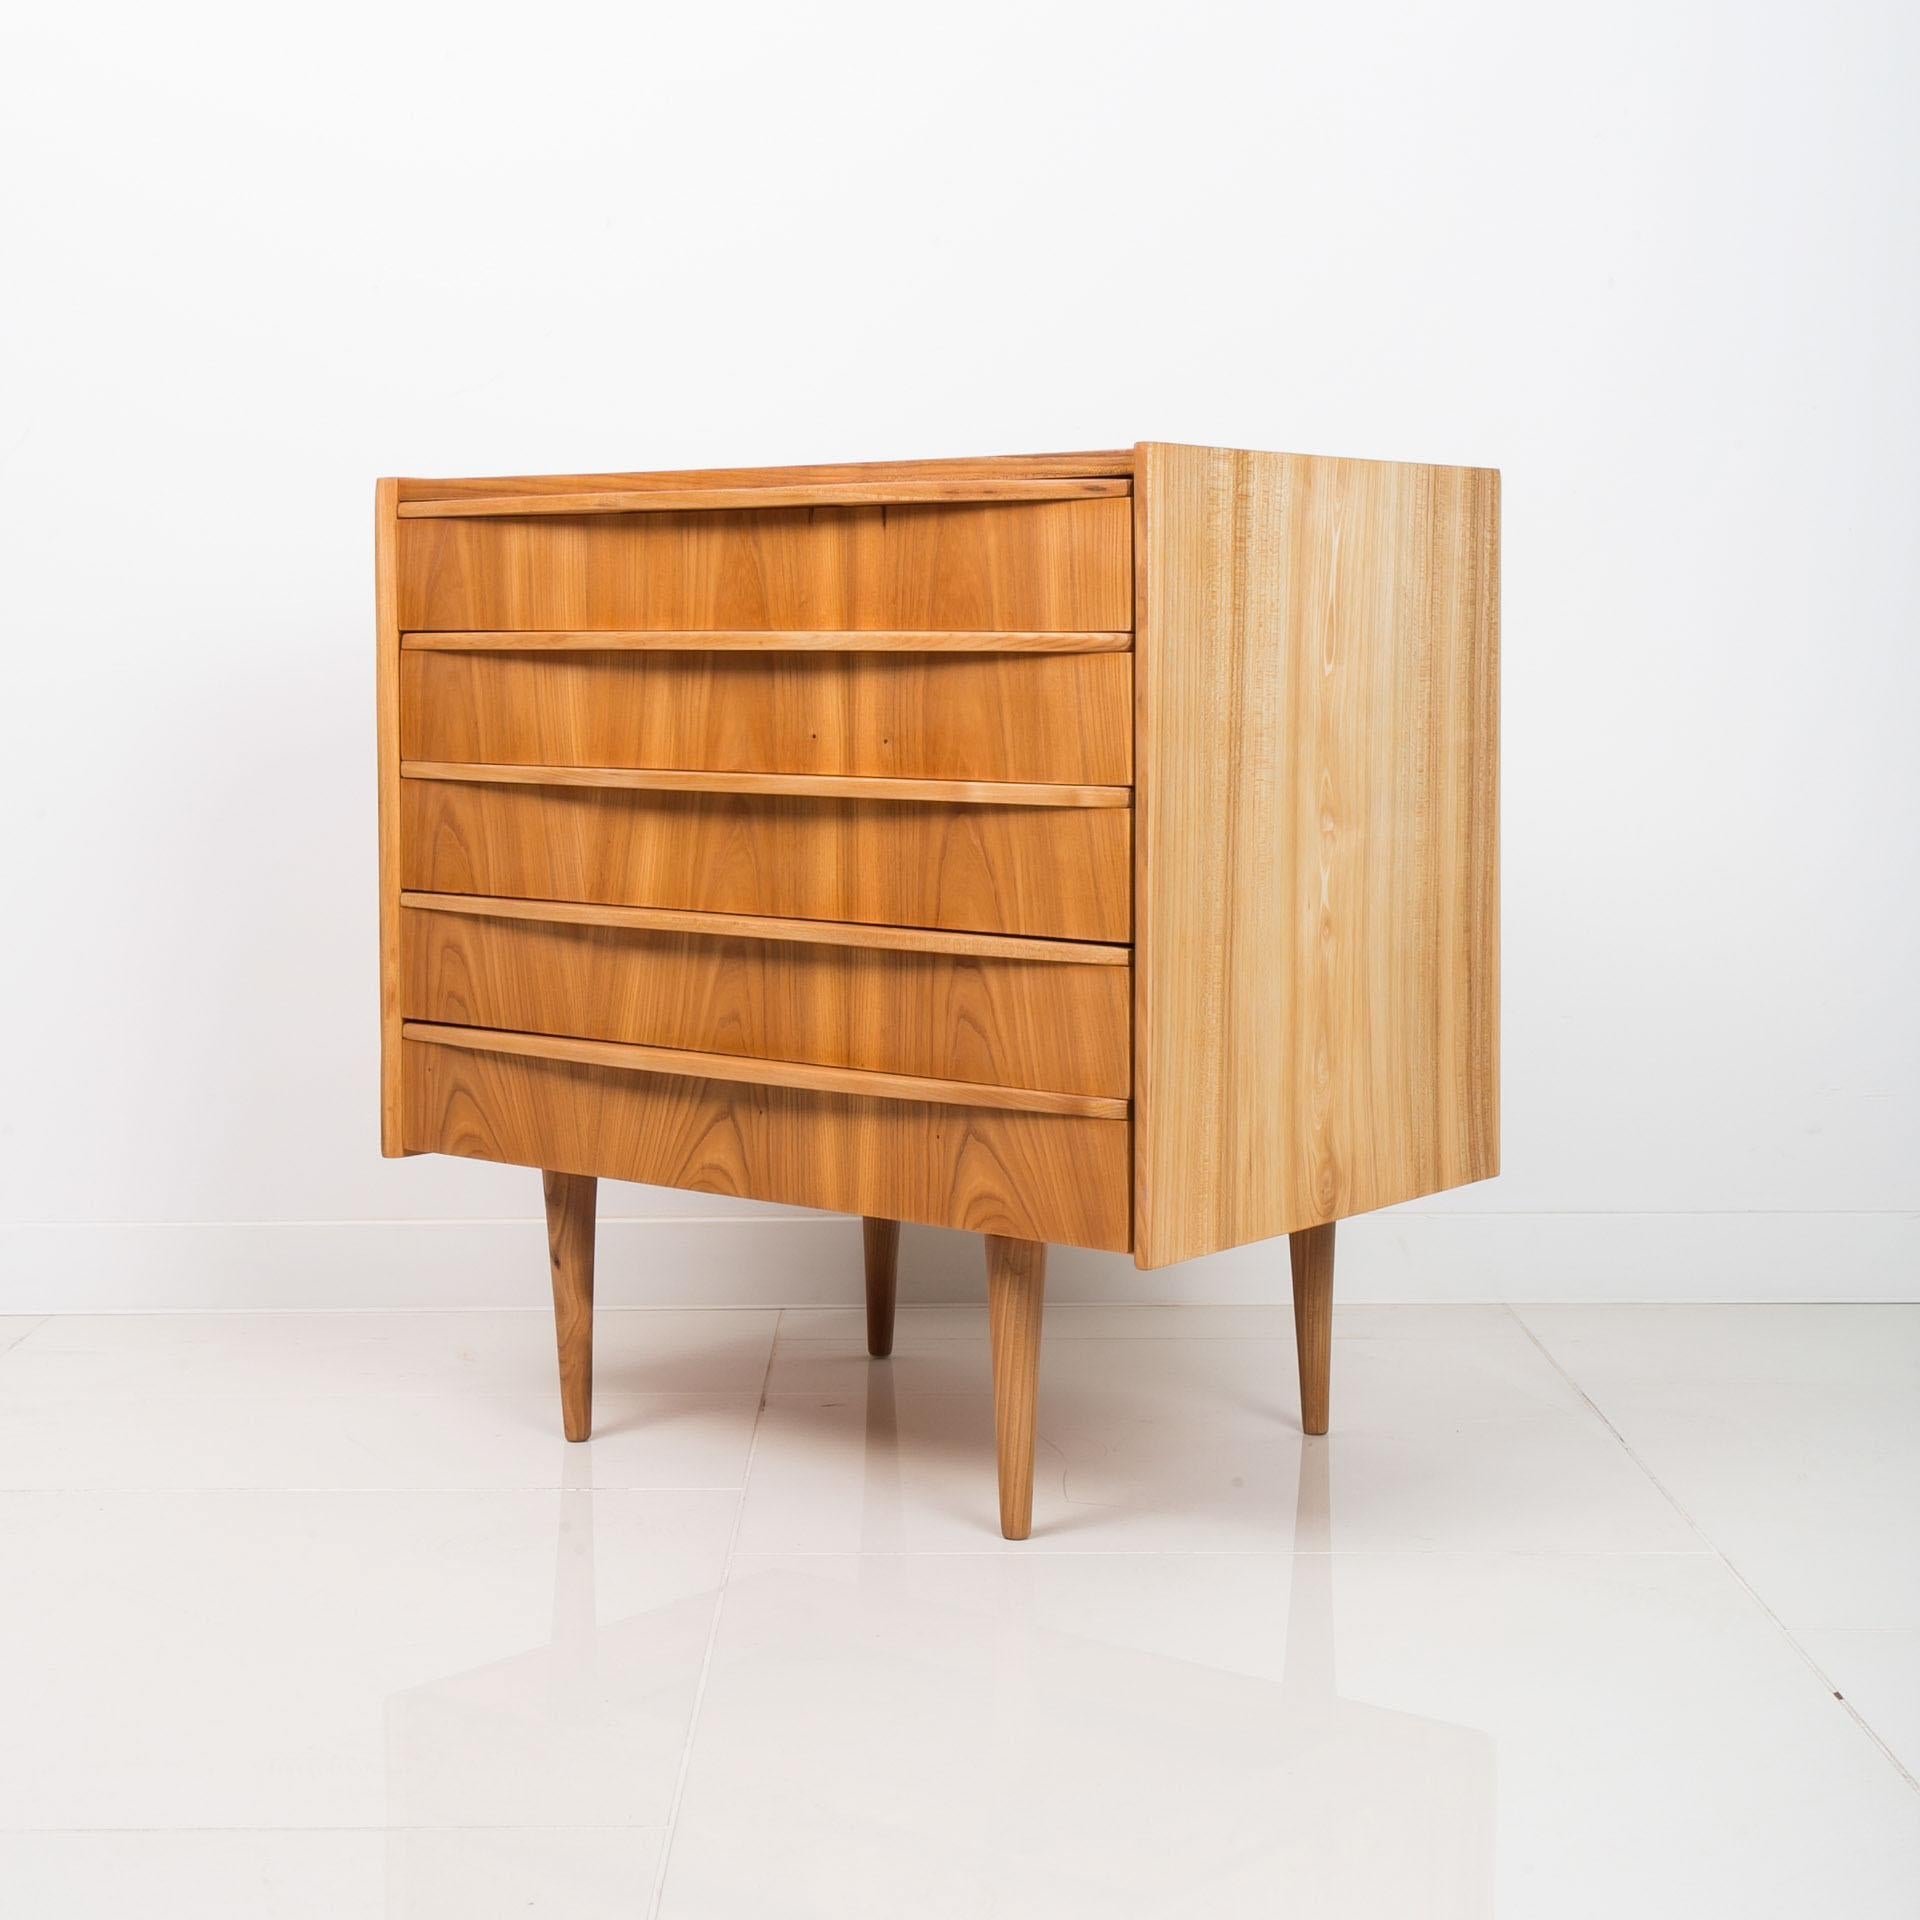 This five-drawer chest of drawers comes from Czechoslovakia from around 1970s. The piece is in very good condition - it underwent careful renovation process. It is veneered with elm veneer. The structure is very stable and the surfaces have been